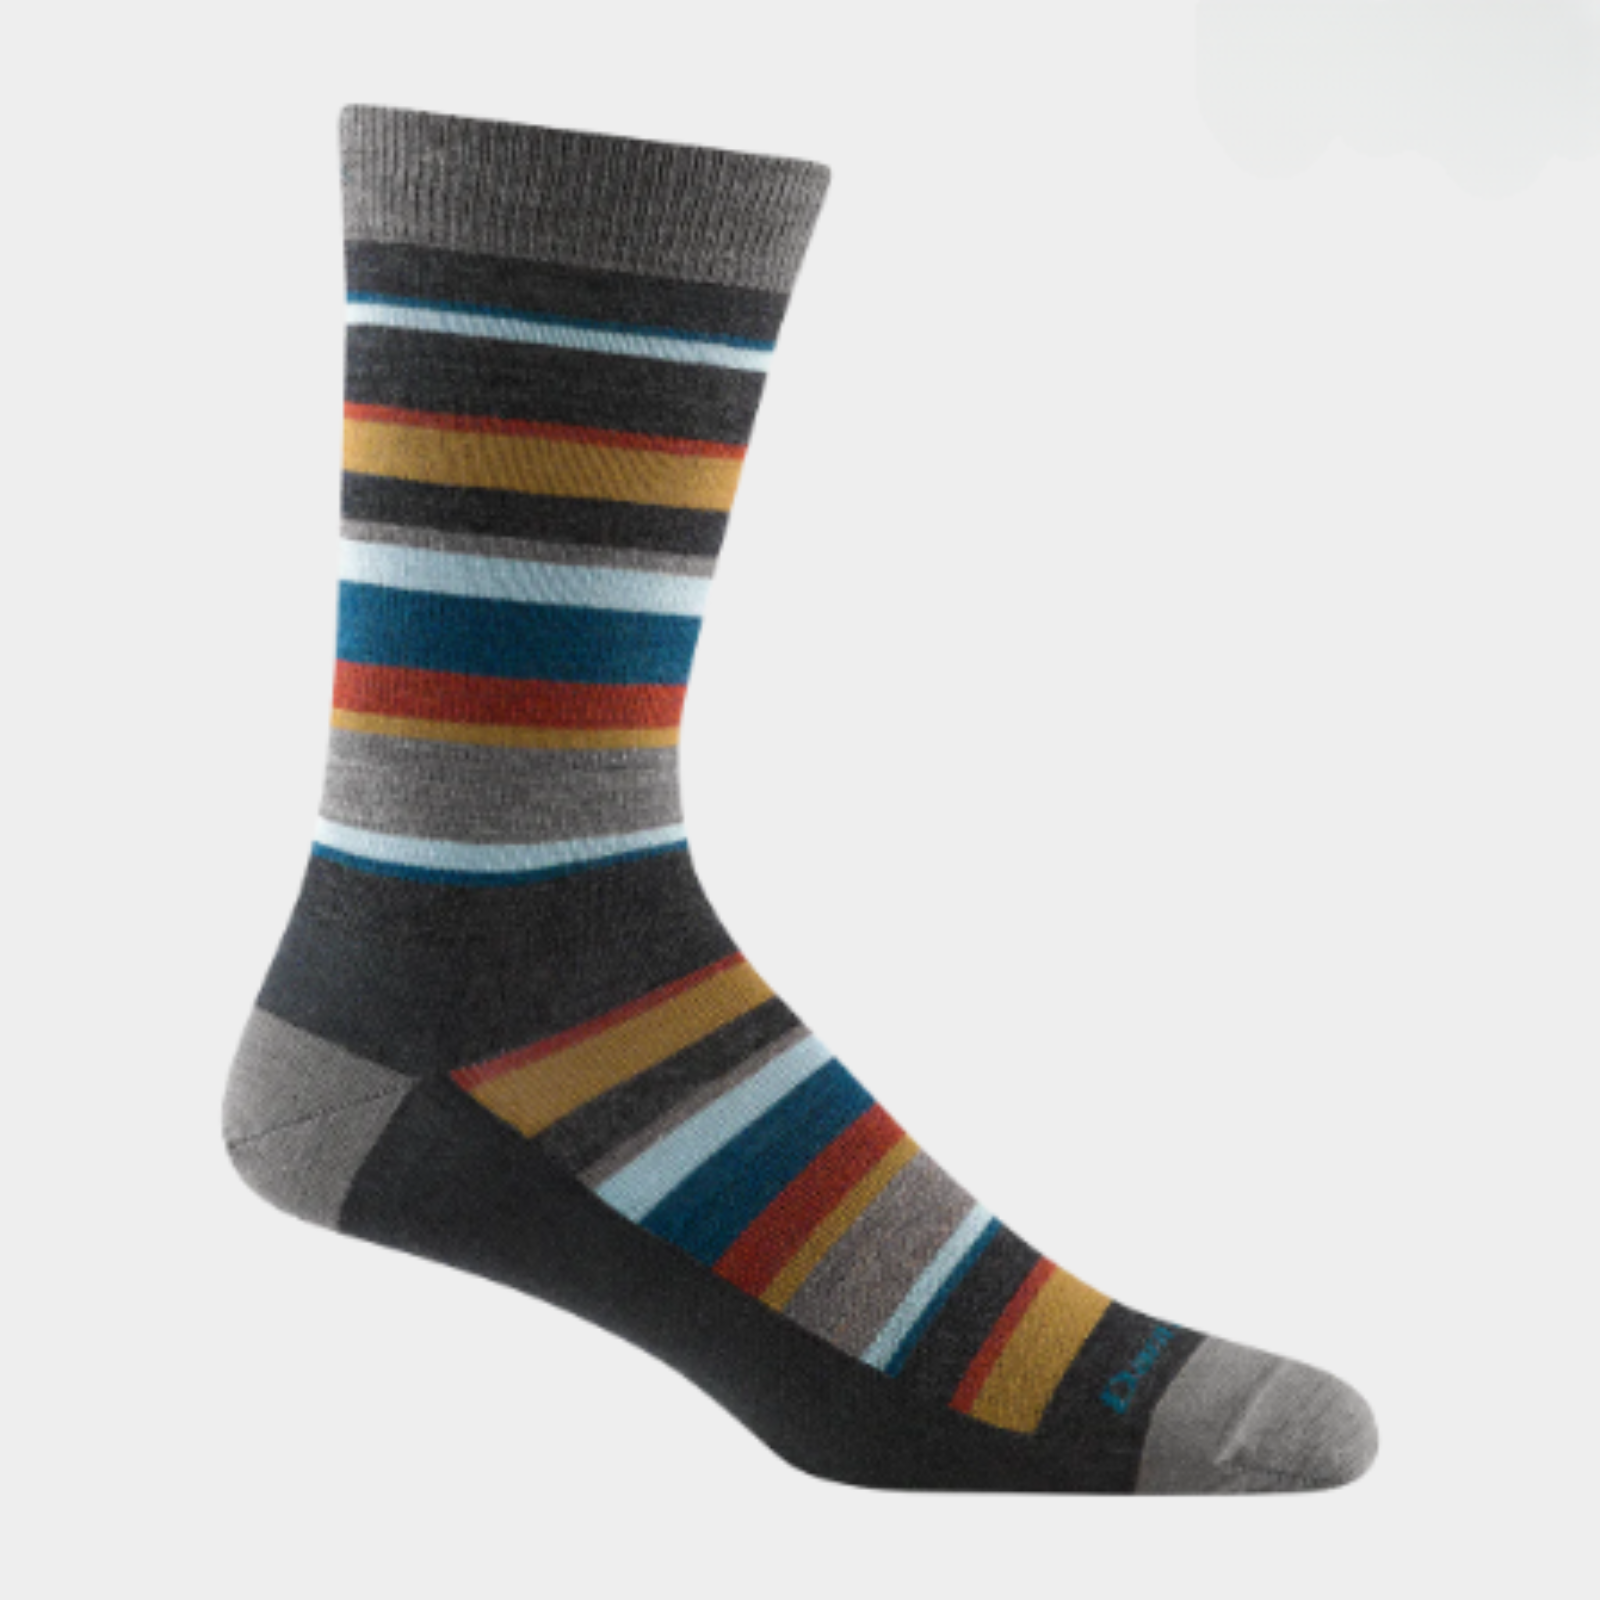 Darn Tough 6090 Druid Crew Lightweight men's crew sock featuring beige, blue, gray stripes all over. Sock shown on display foot. 